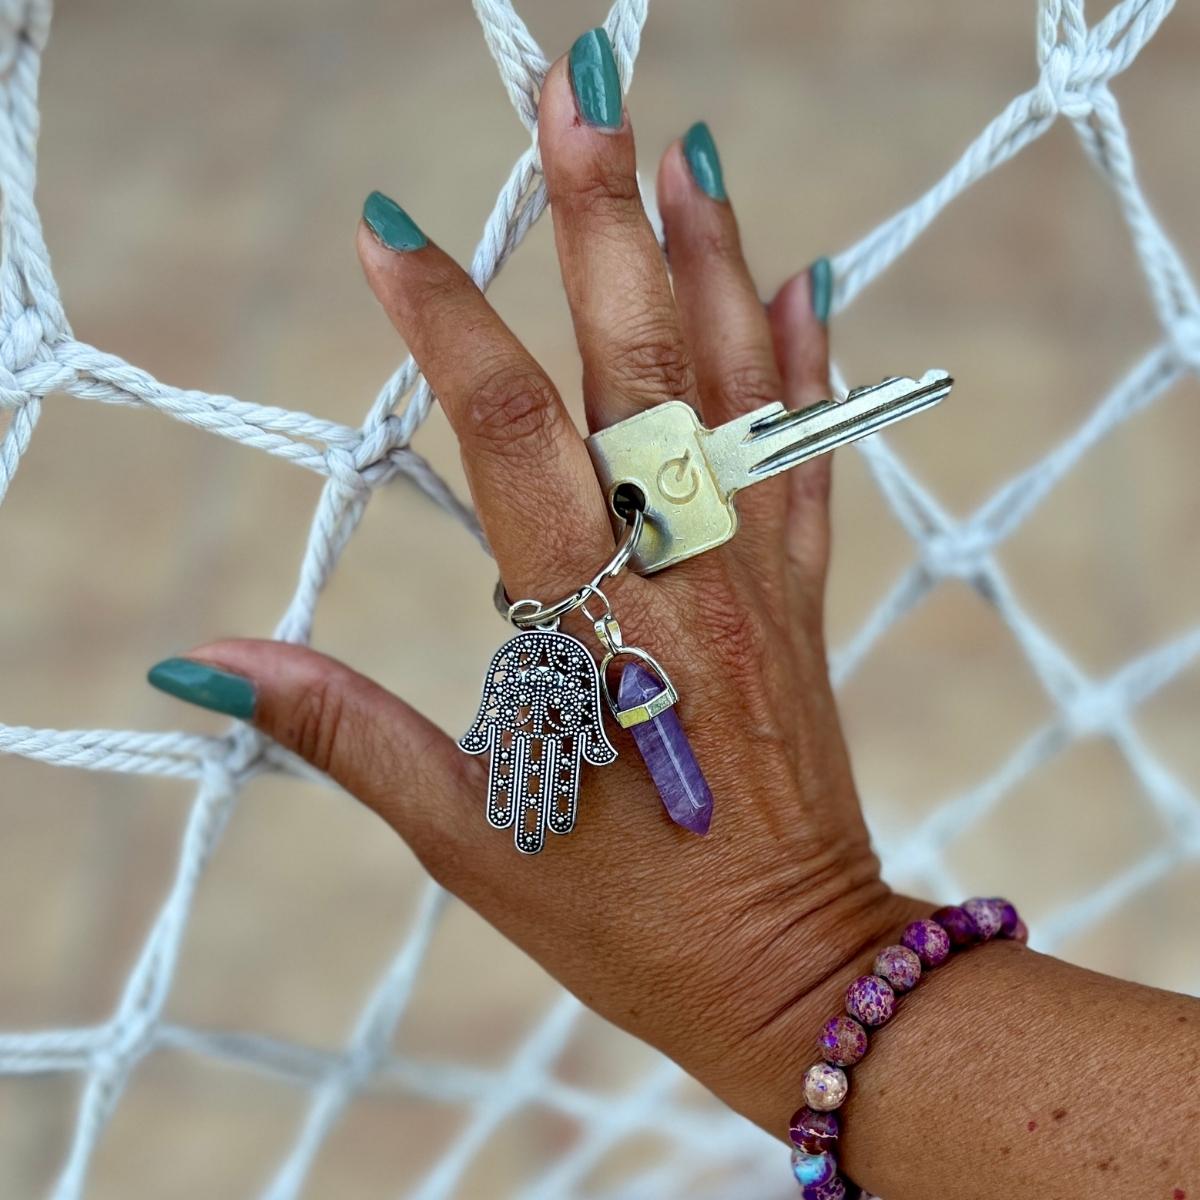 The "Hamsa - Shielding Hand Keychain" takes on a new enchanting form with the addition of a double-pointed Amethyst crystal and a dangling Hamsa hand charm. This keychain seamlessly blends spiritual significance with a touch of whimsy, creating a truly captivating accessory.